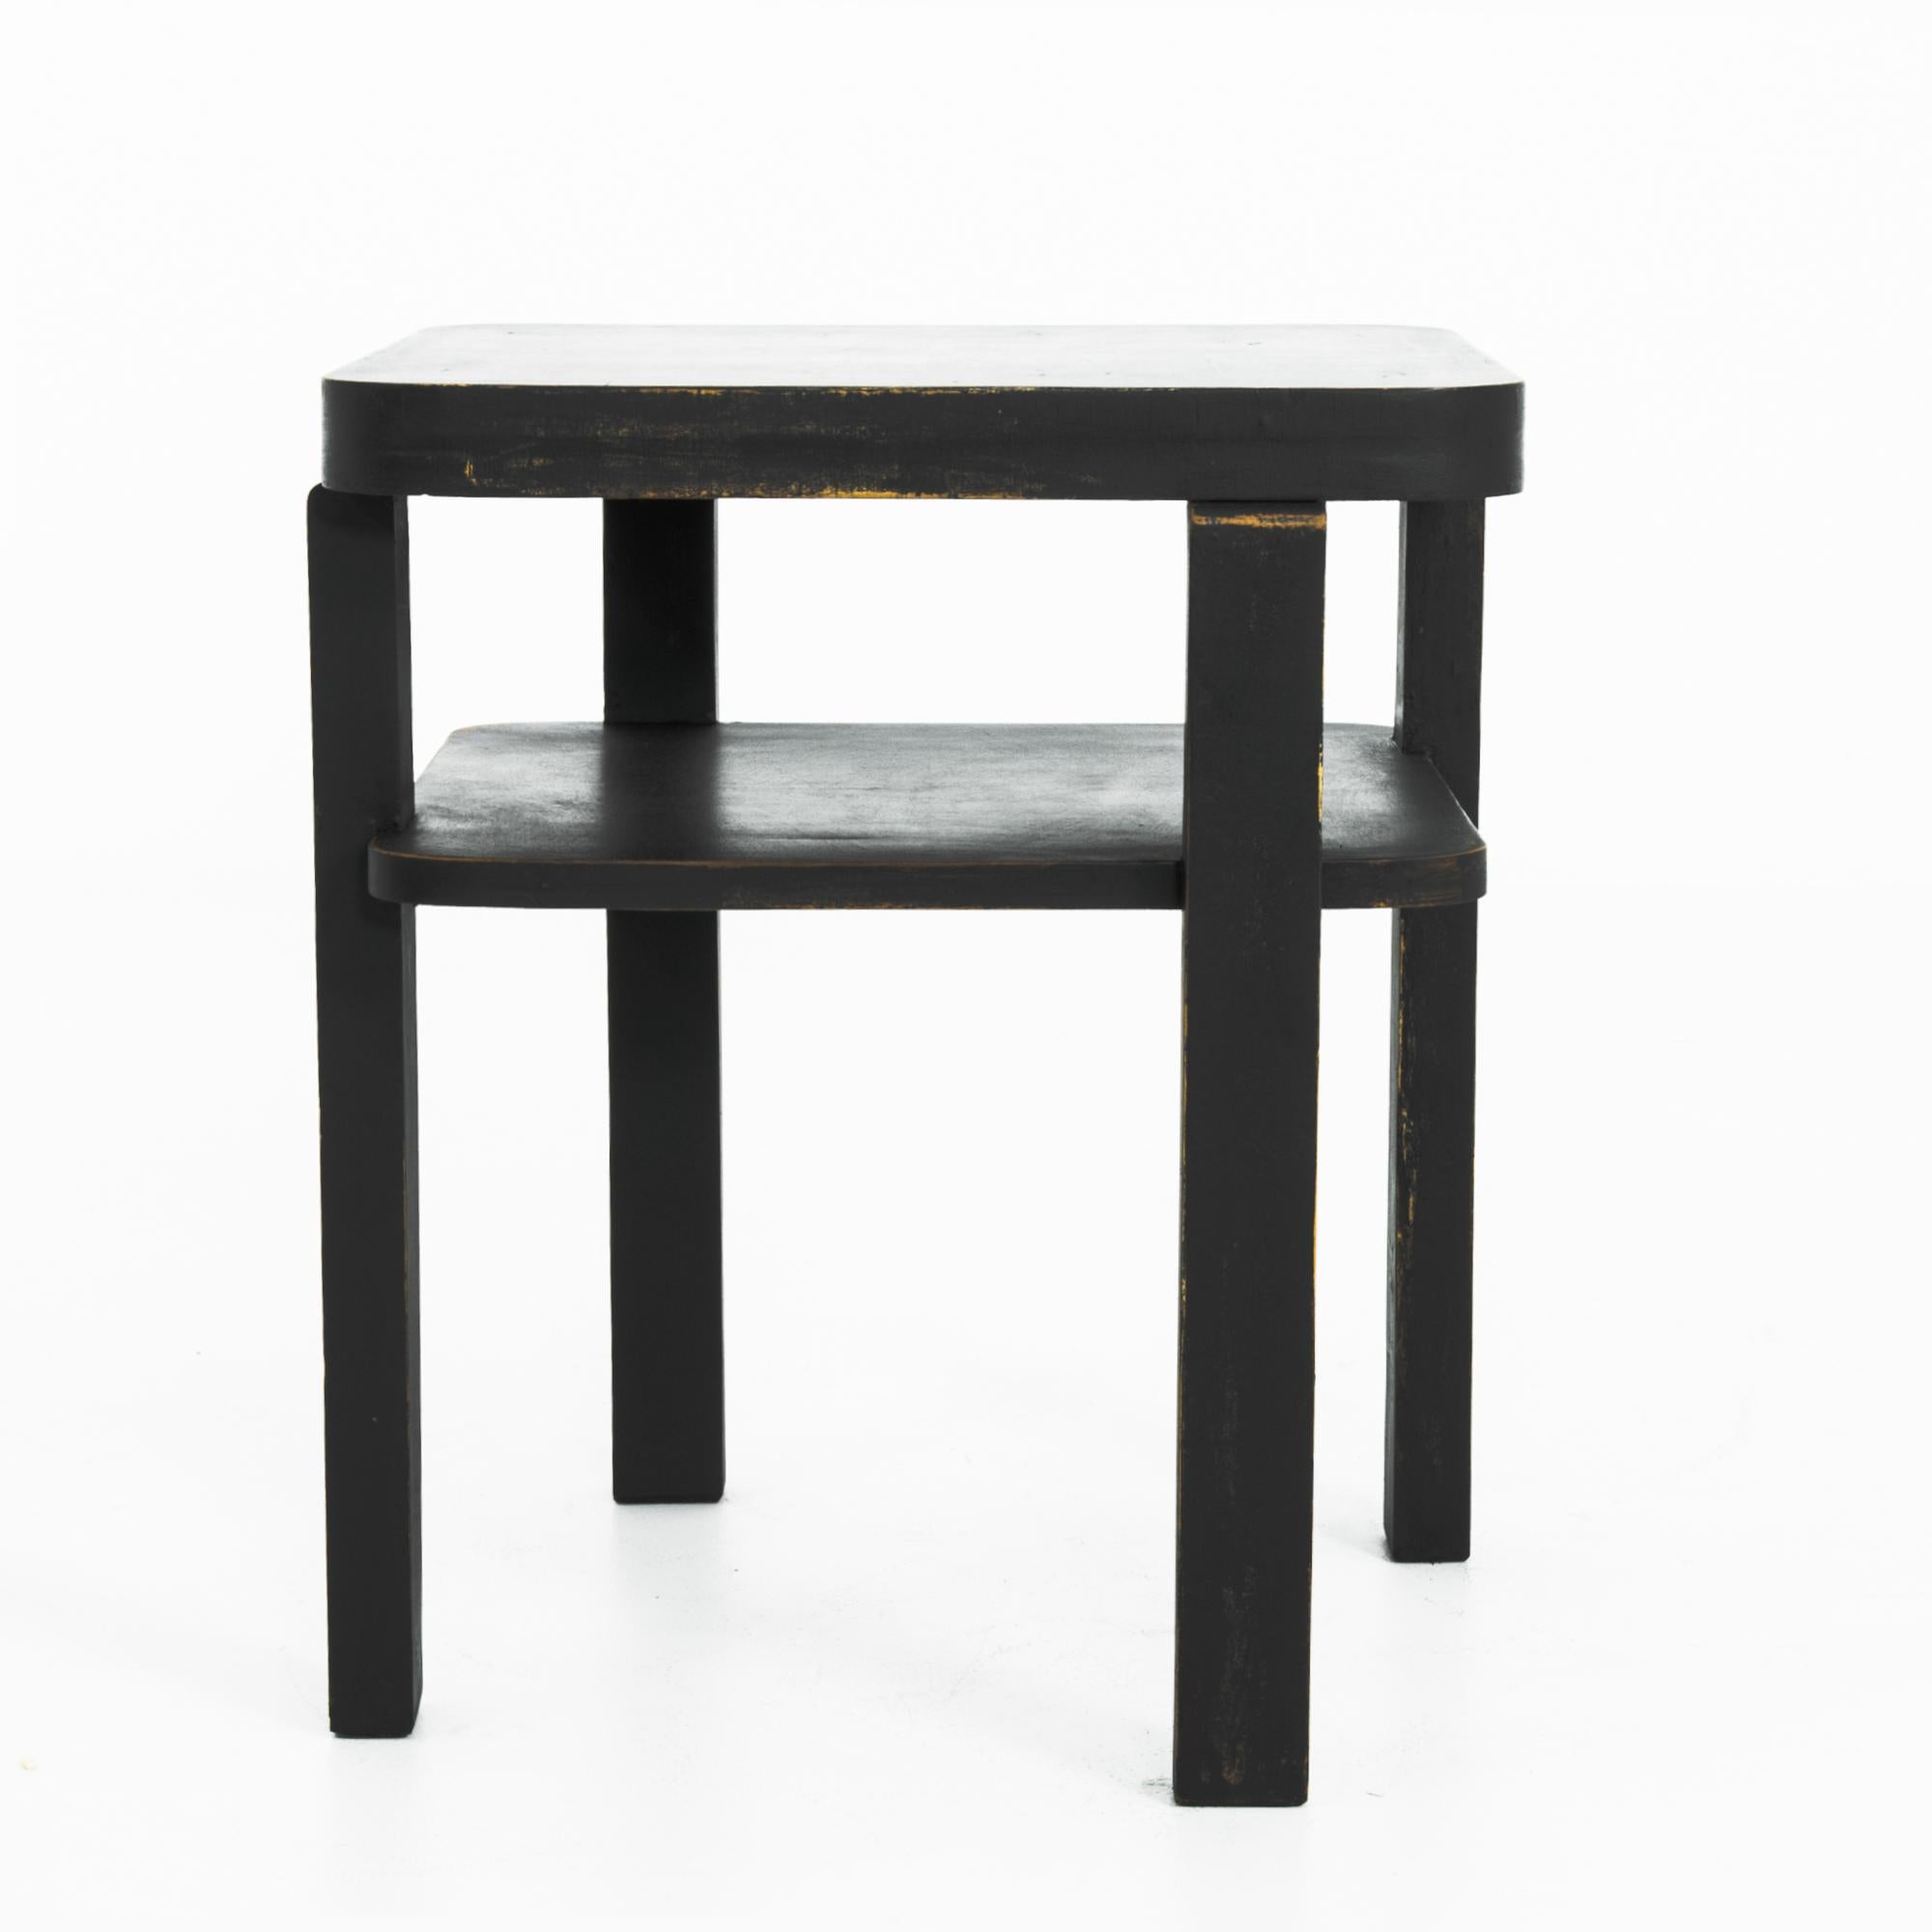 A glass topped wooden table from Czechia, circa 1930. With a Modernist era provenance, this piece delivers a subtle sleek simplicity, elegantly aged in black, giving a sleek inflection. Modern yet homey, the design has an attractive simplicity.